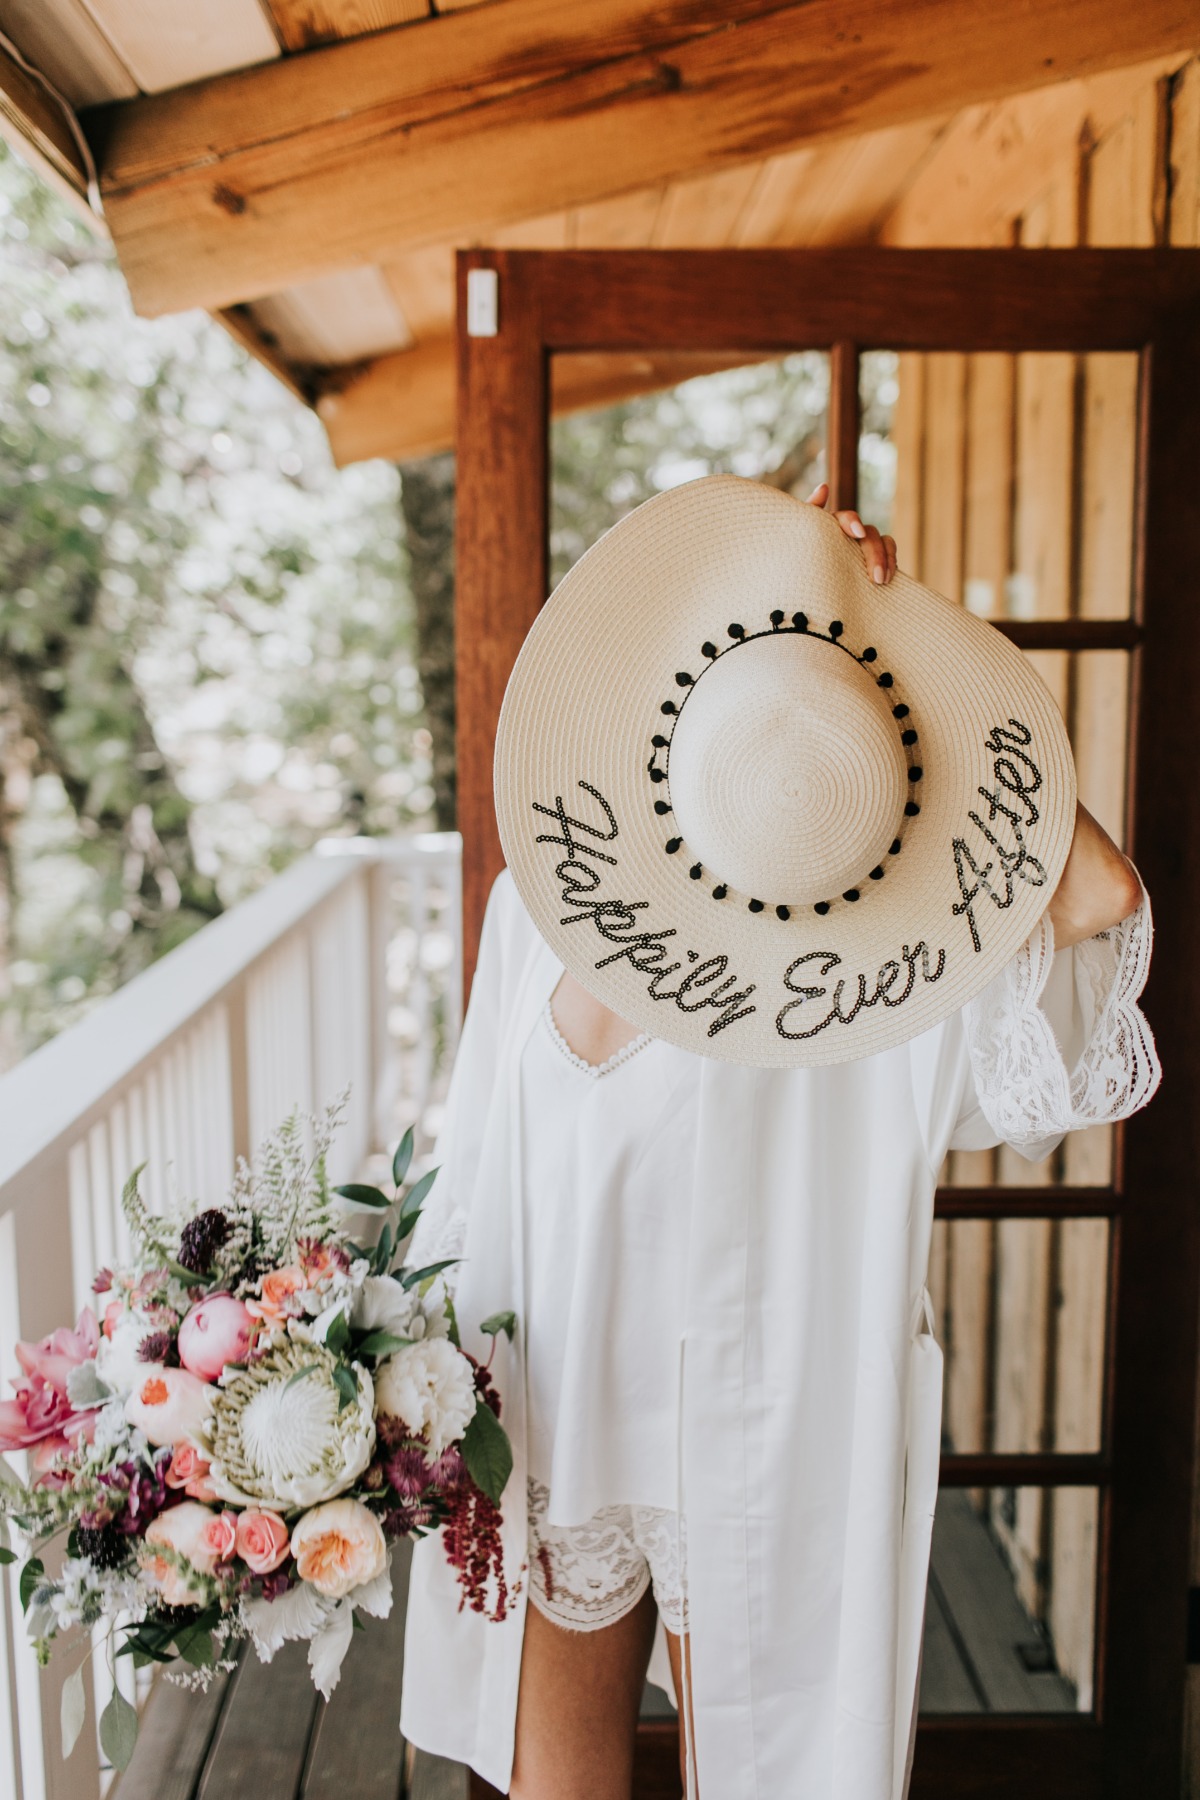 Happily Ever After wedding hat